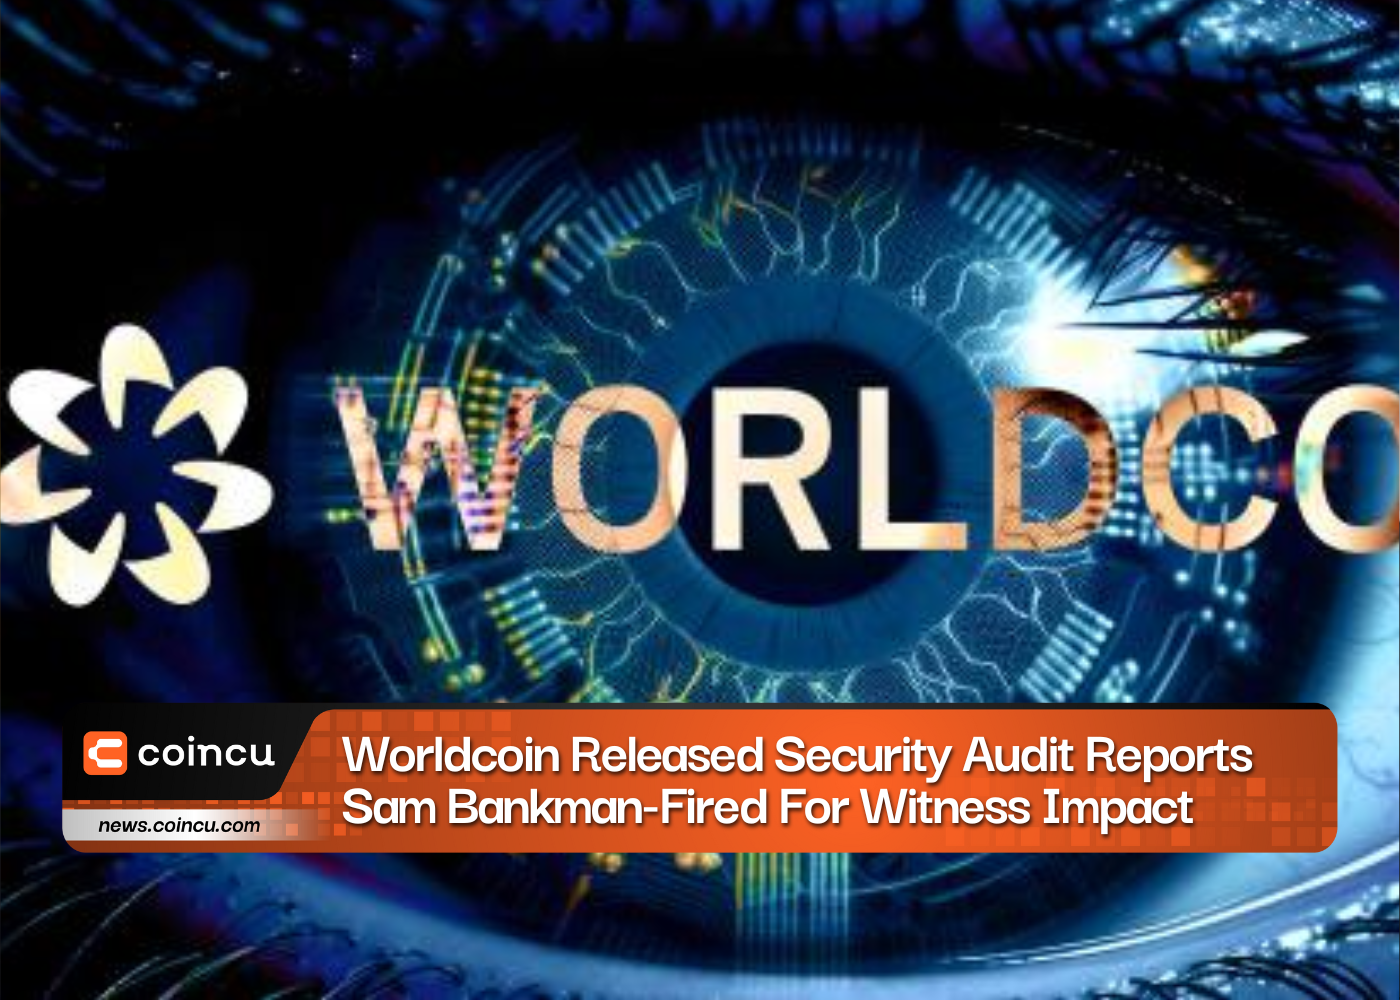 Worldcoin Released Security Audit Reports, 92.6% Security Issues Fixed